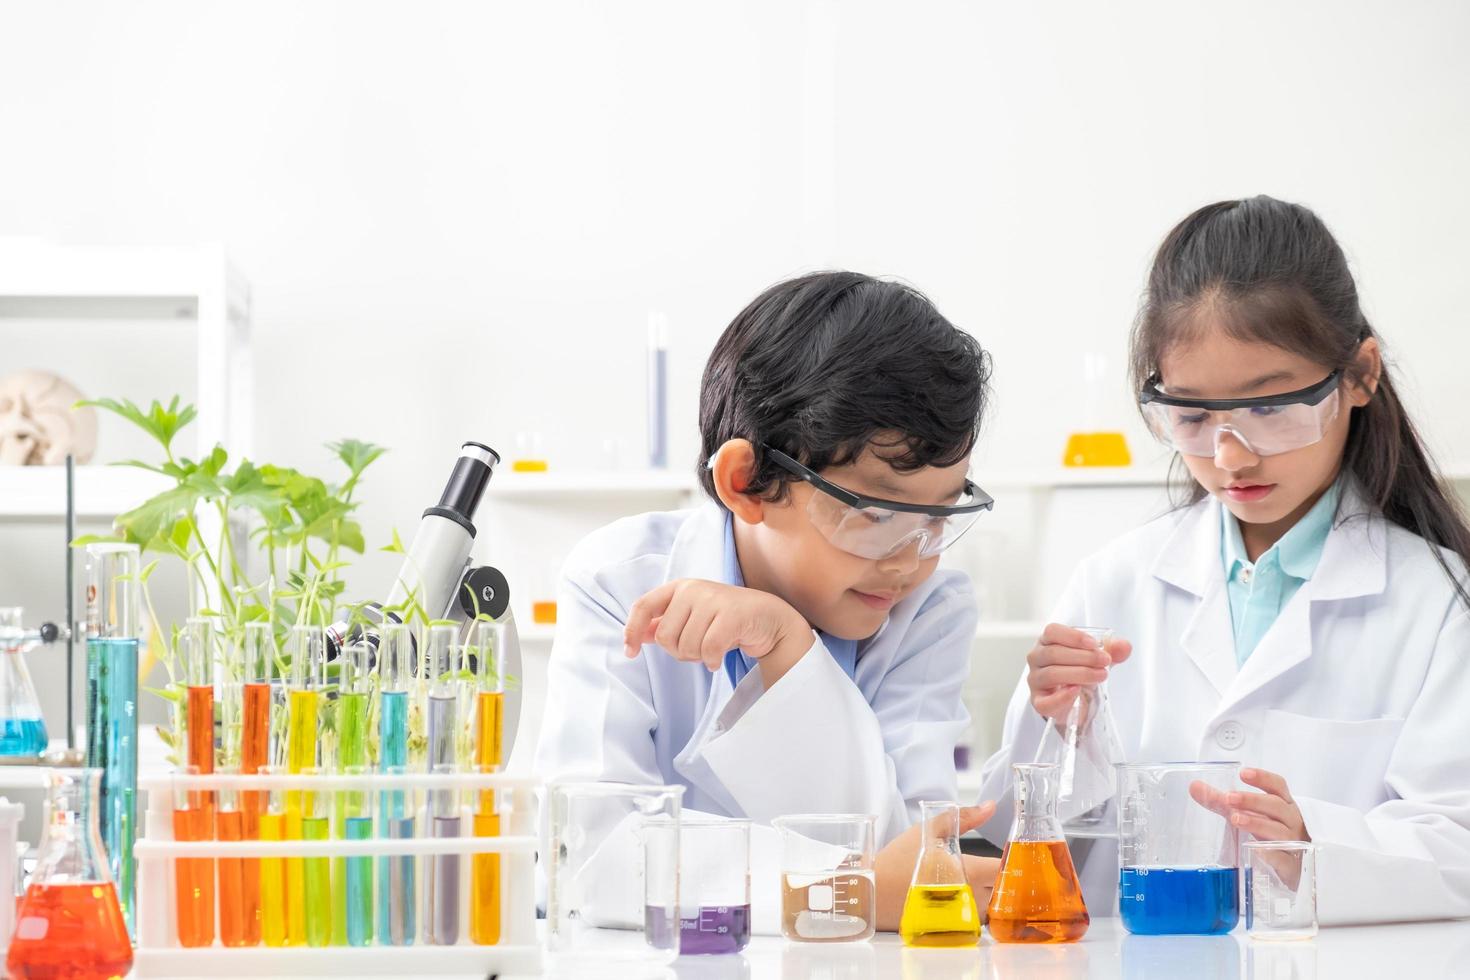 Young Asian boy and girl smile and having fun while learning science experiment in laboratory with teacher in classroom. Study with scientific equipment and tubes. Education concept. photo